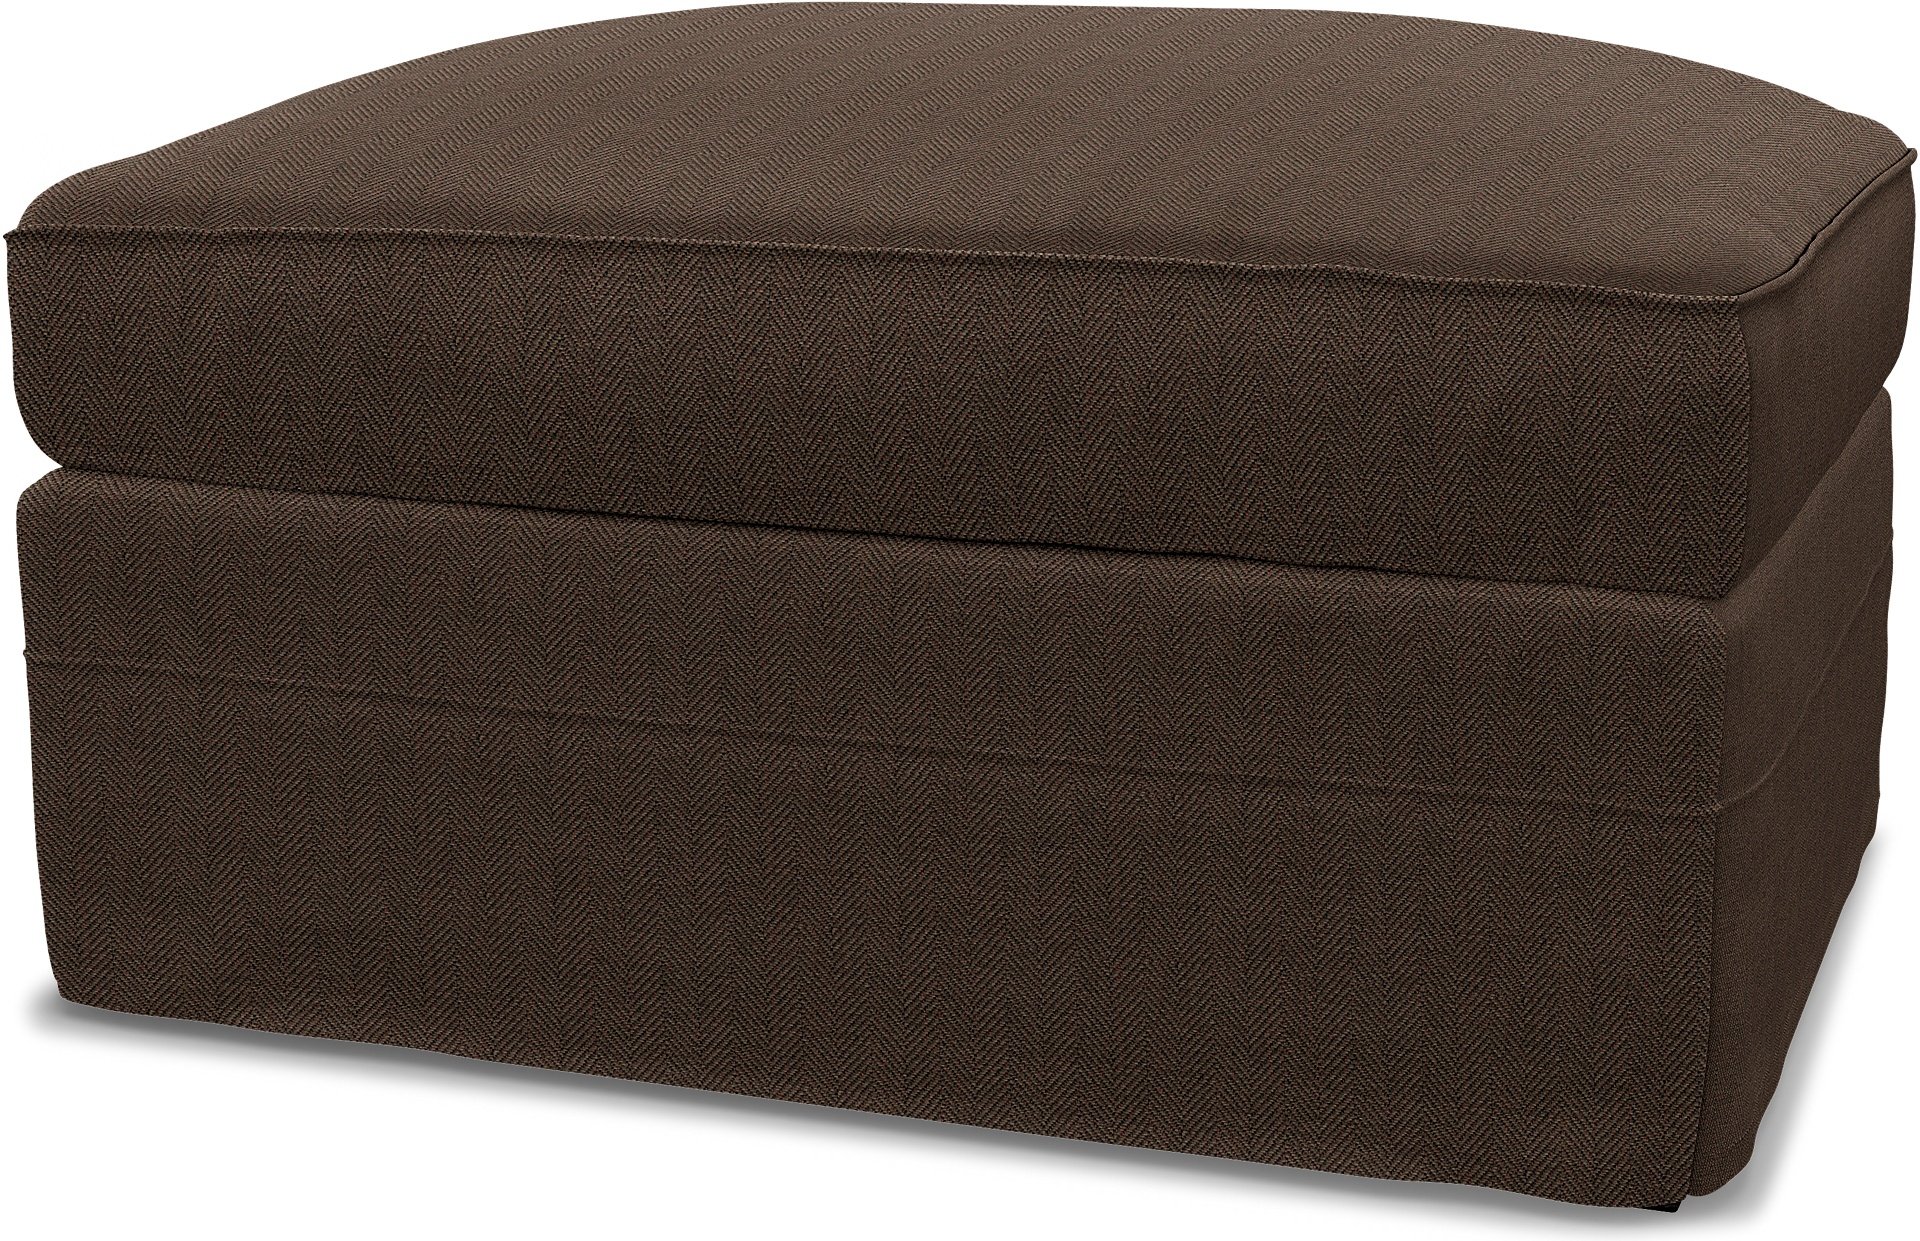 IKEA - Gronlid Footstool with Storage Cover, Chocolate, Boucle & Texture - Bemz